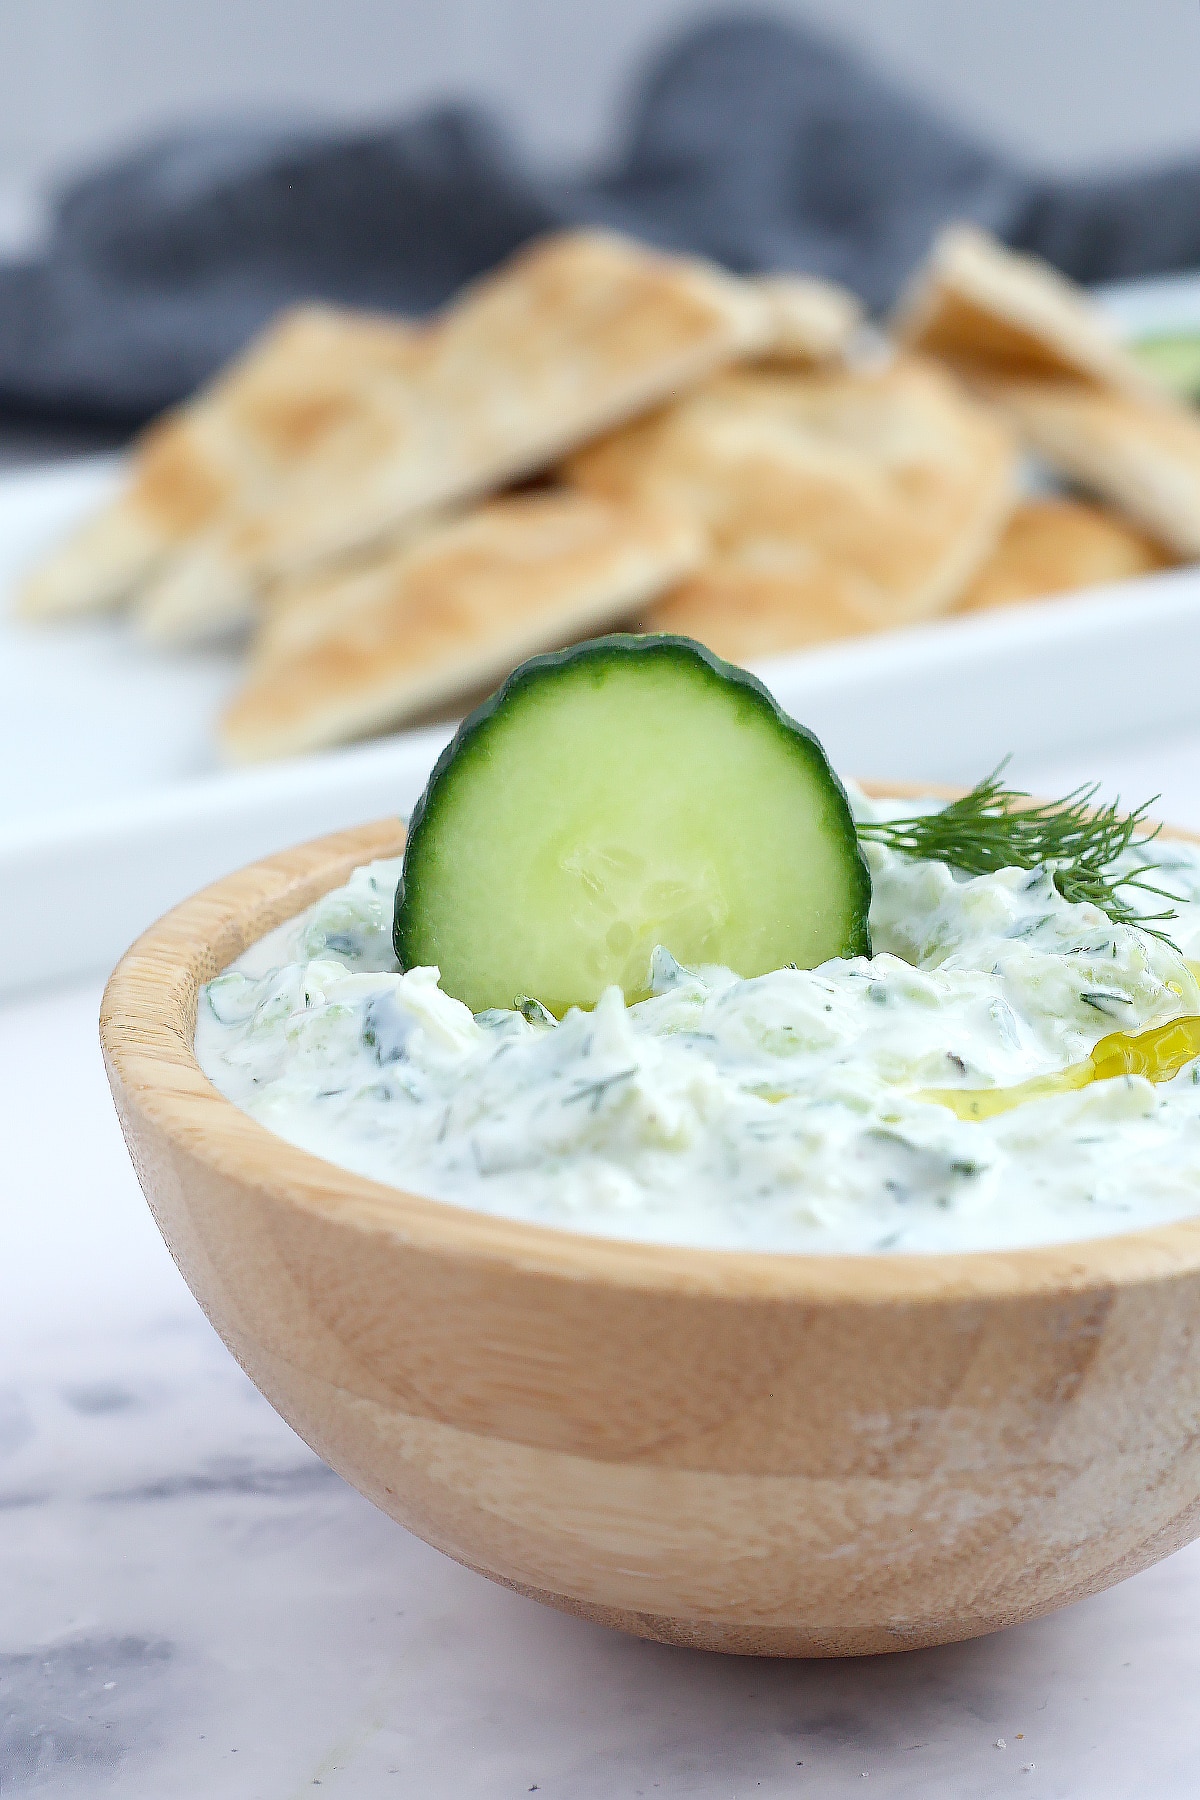 Homemade tzatziki dip in a wooden bowl served with fresh pita triangles.